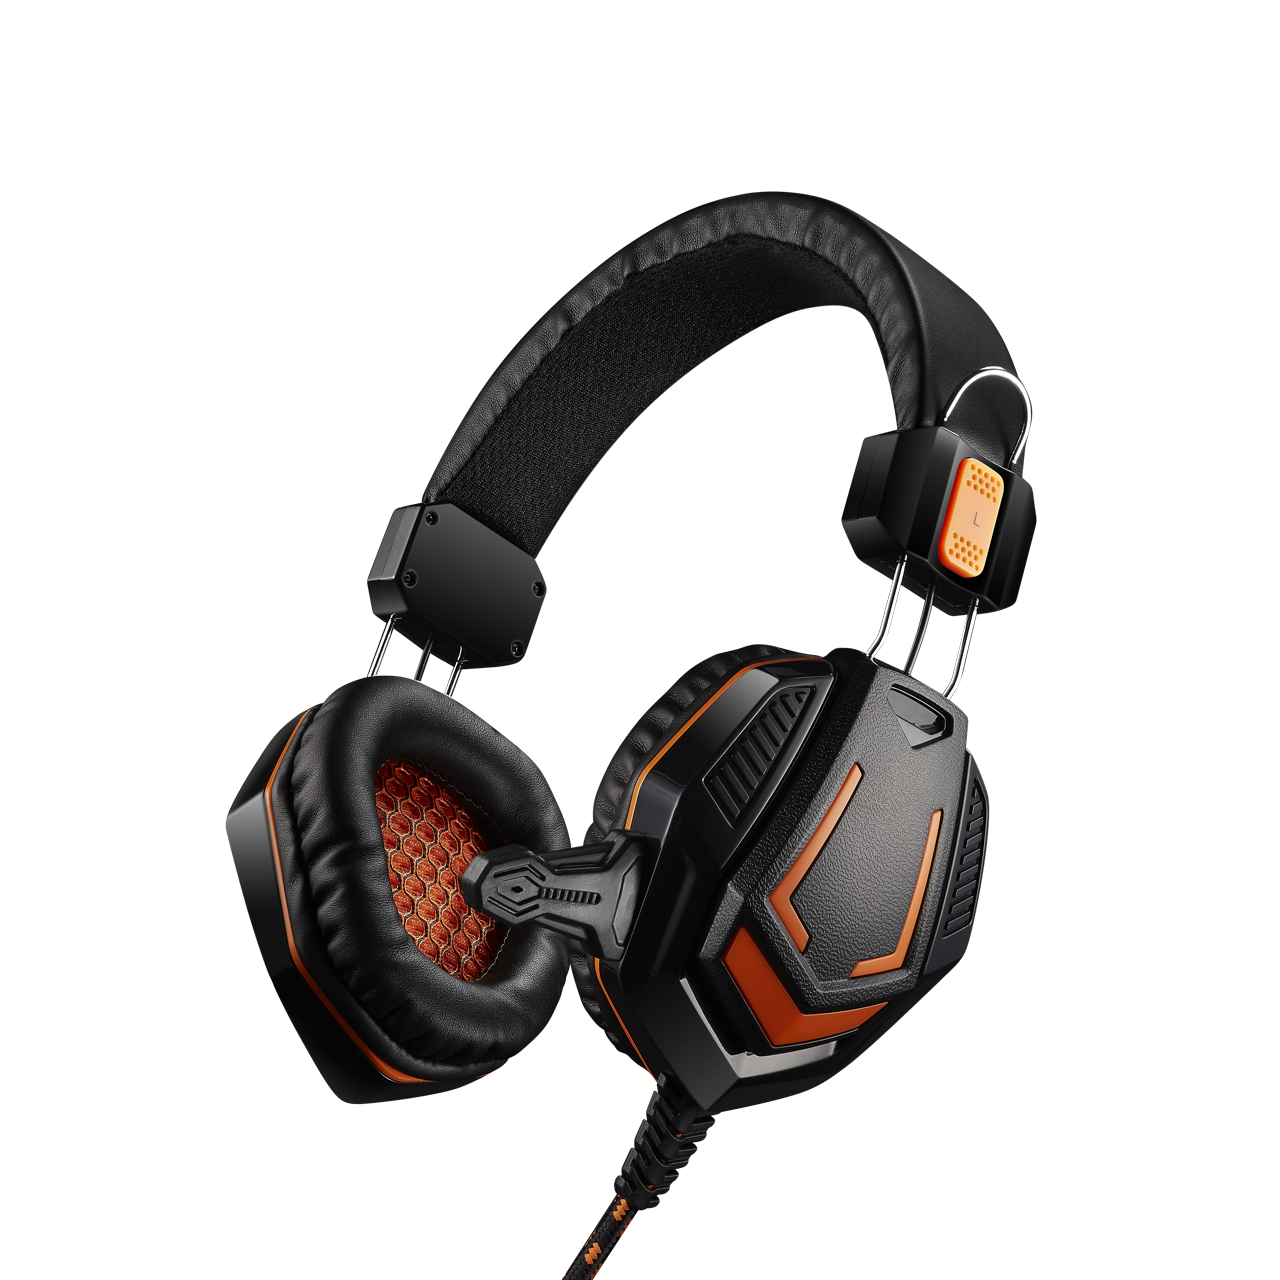 купить CANYON Gaming headset 3.5mm jack with microphone and volume control, with 2in1 3.5mm adapter, cable 2M, Black, 0.36kg в Алматы